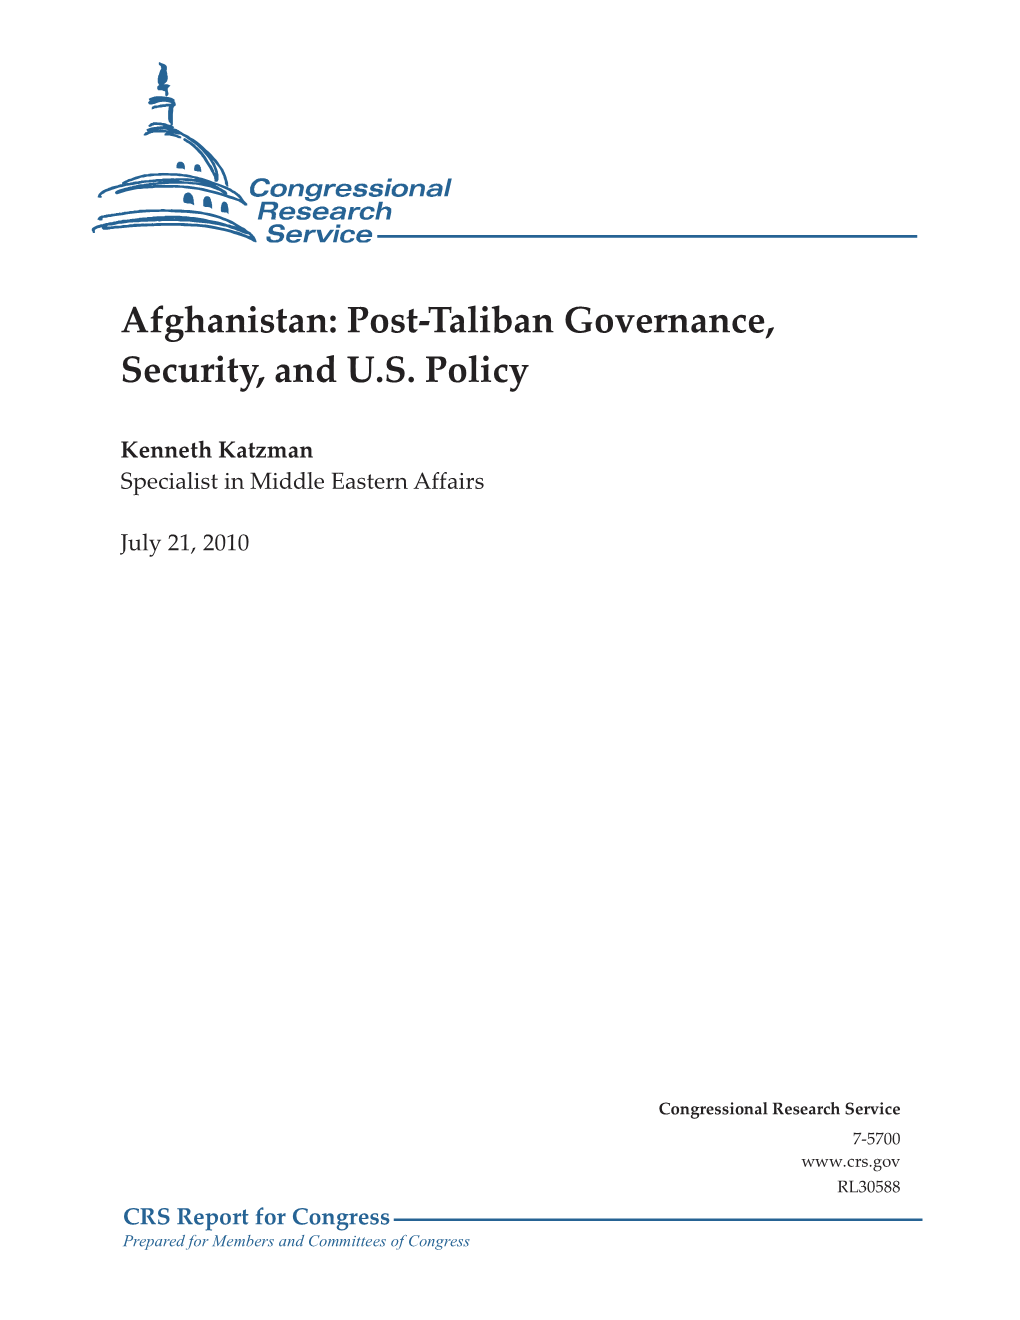 Post-Taliban Governance, Security, and US Policy